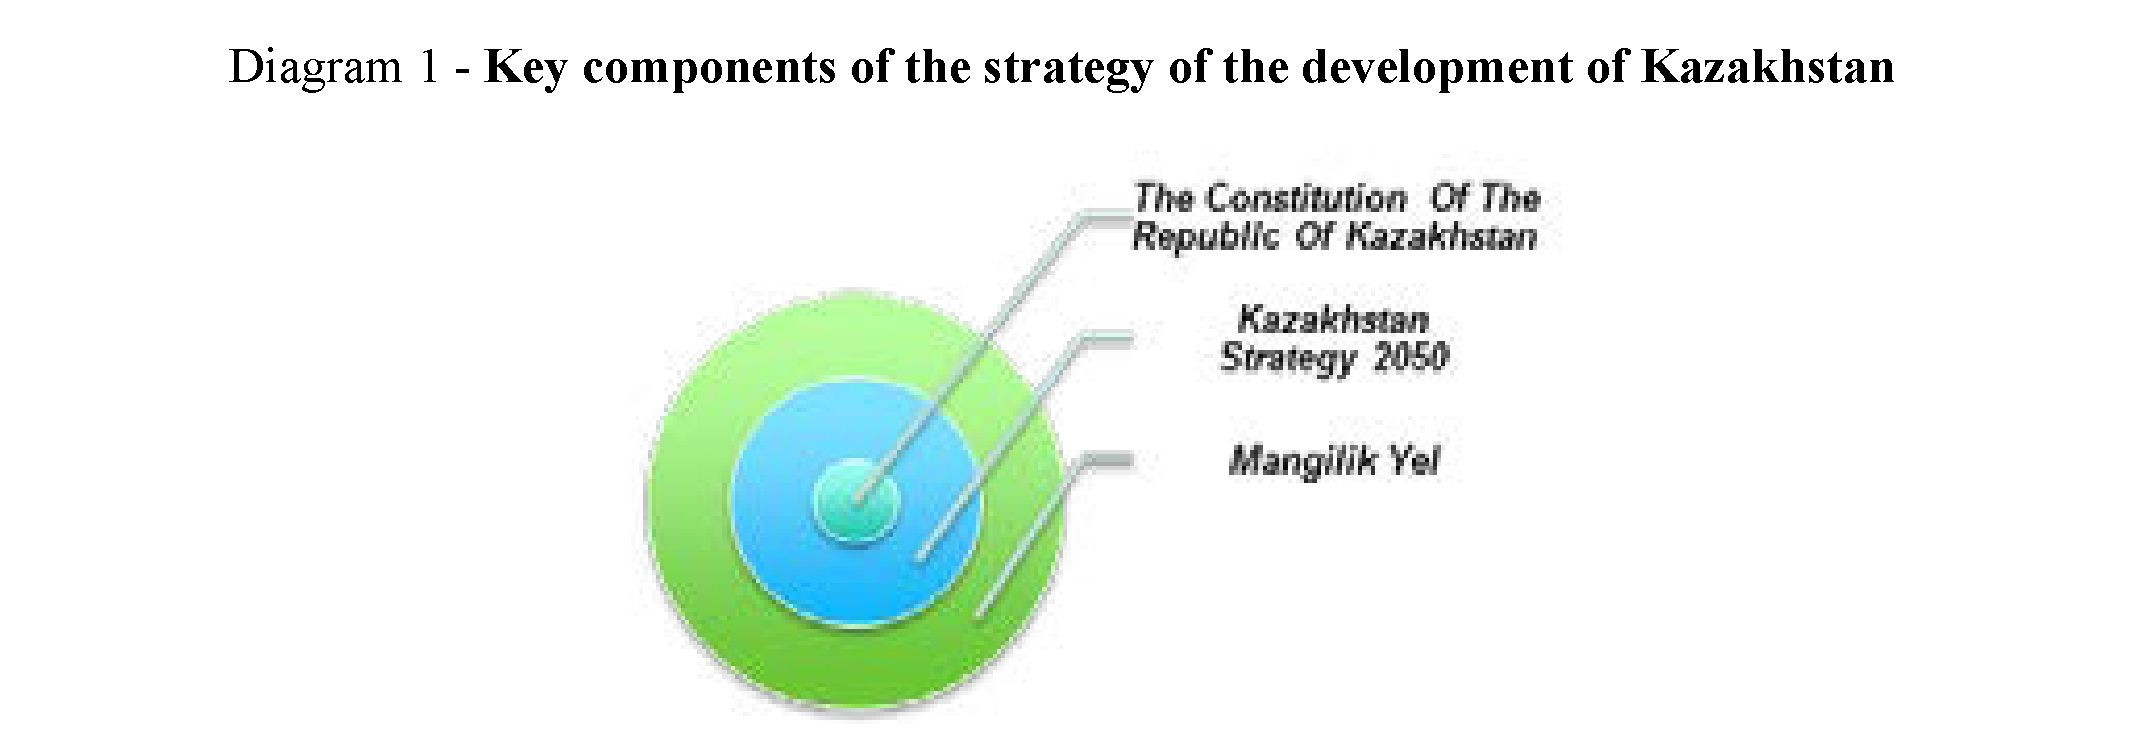 The 20th Anniversary of the Constitution of the Republic of Kazakhstan: New Horizons for the Development of Country